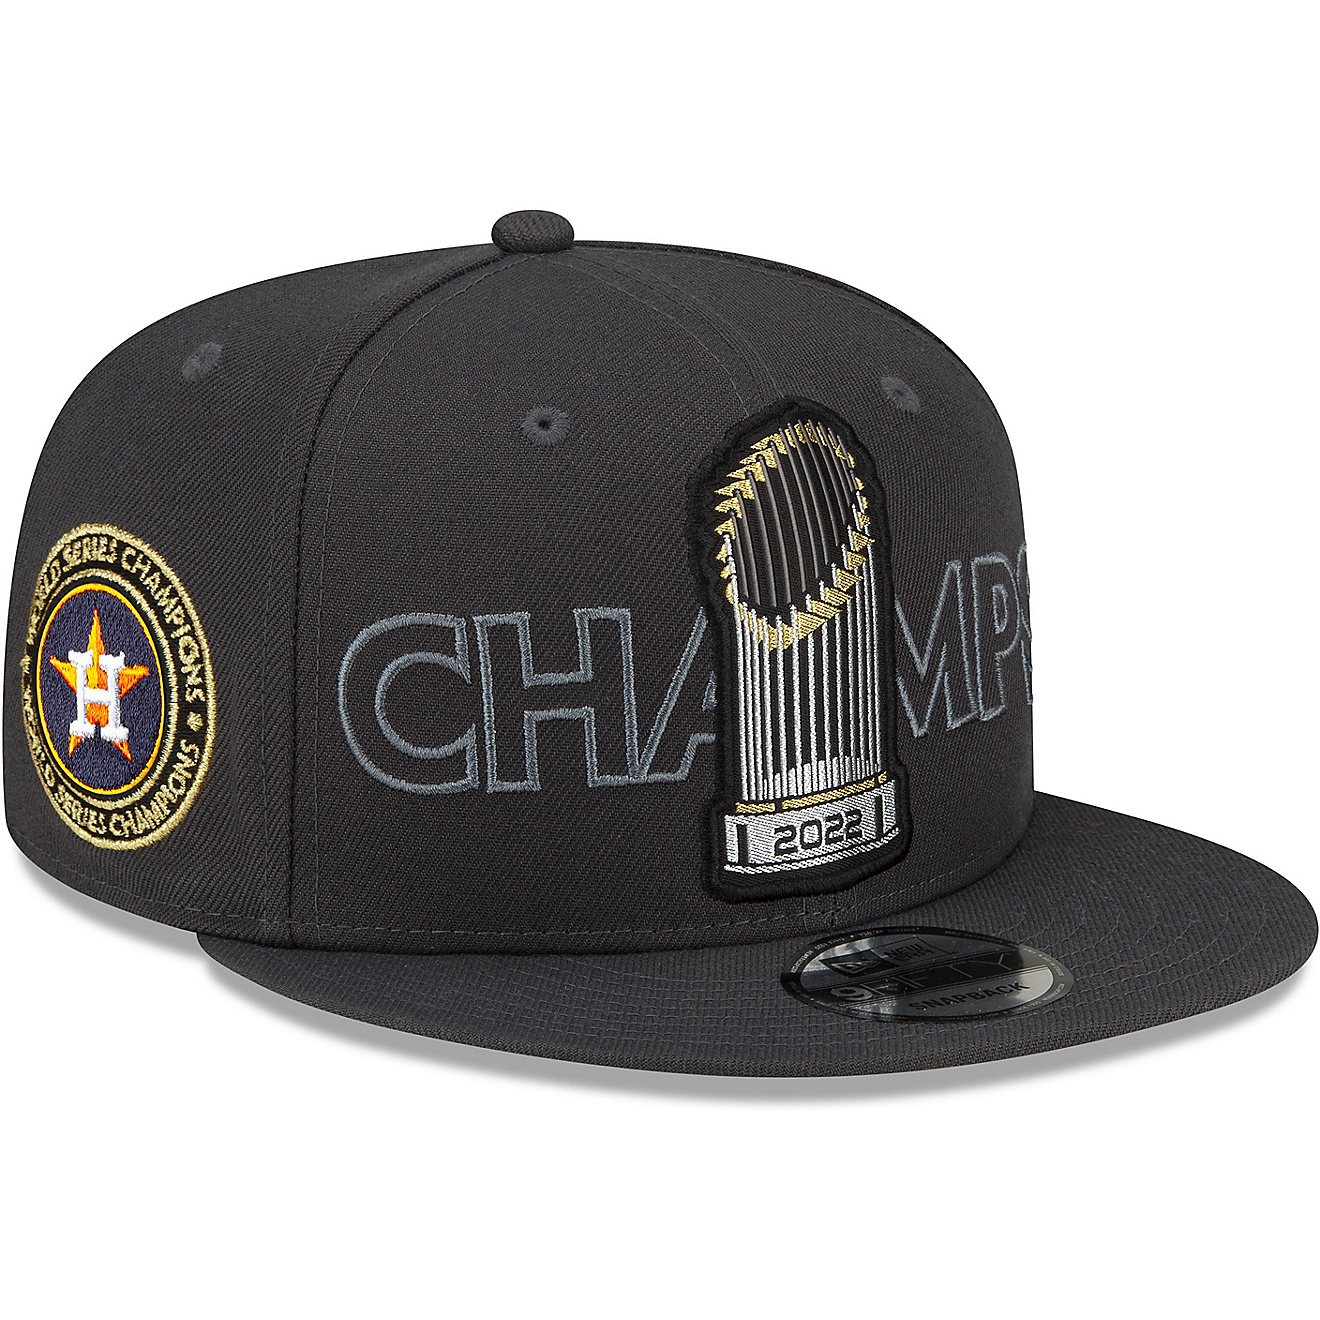 New Era Houston Astros 2022 World Series Parade 9FIFTY Cap                                                                       - view number 3